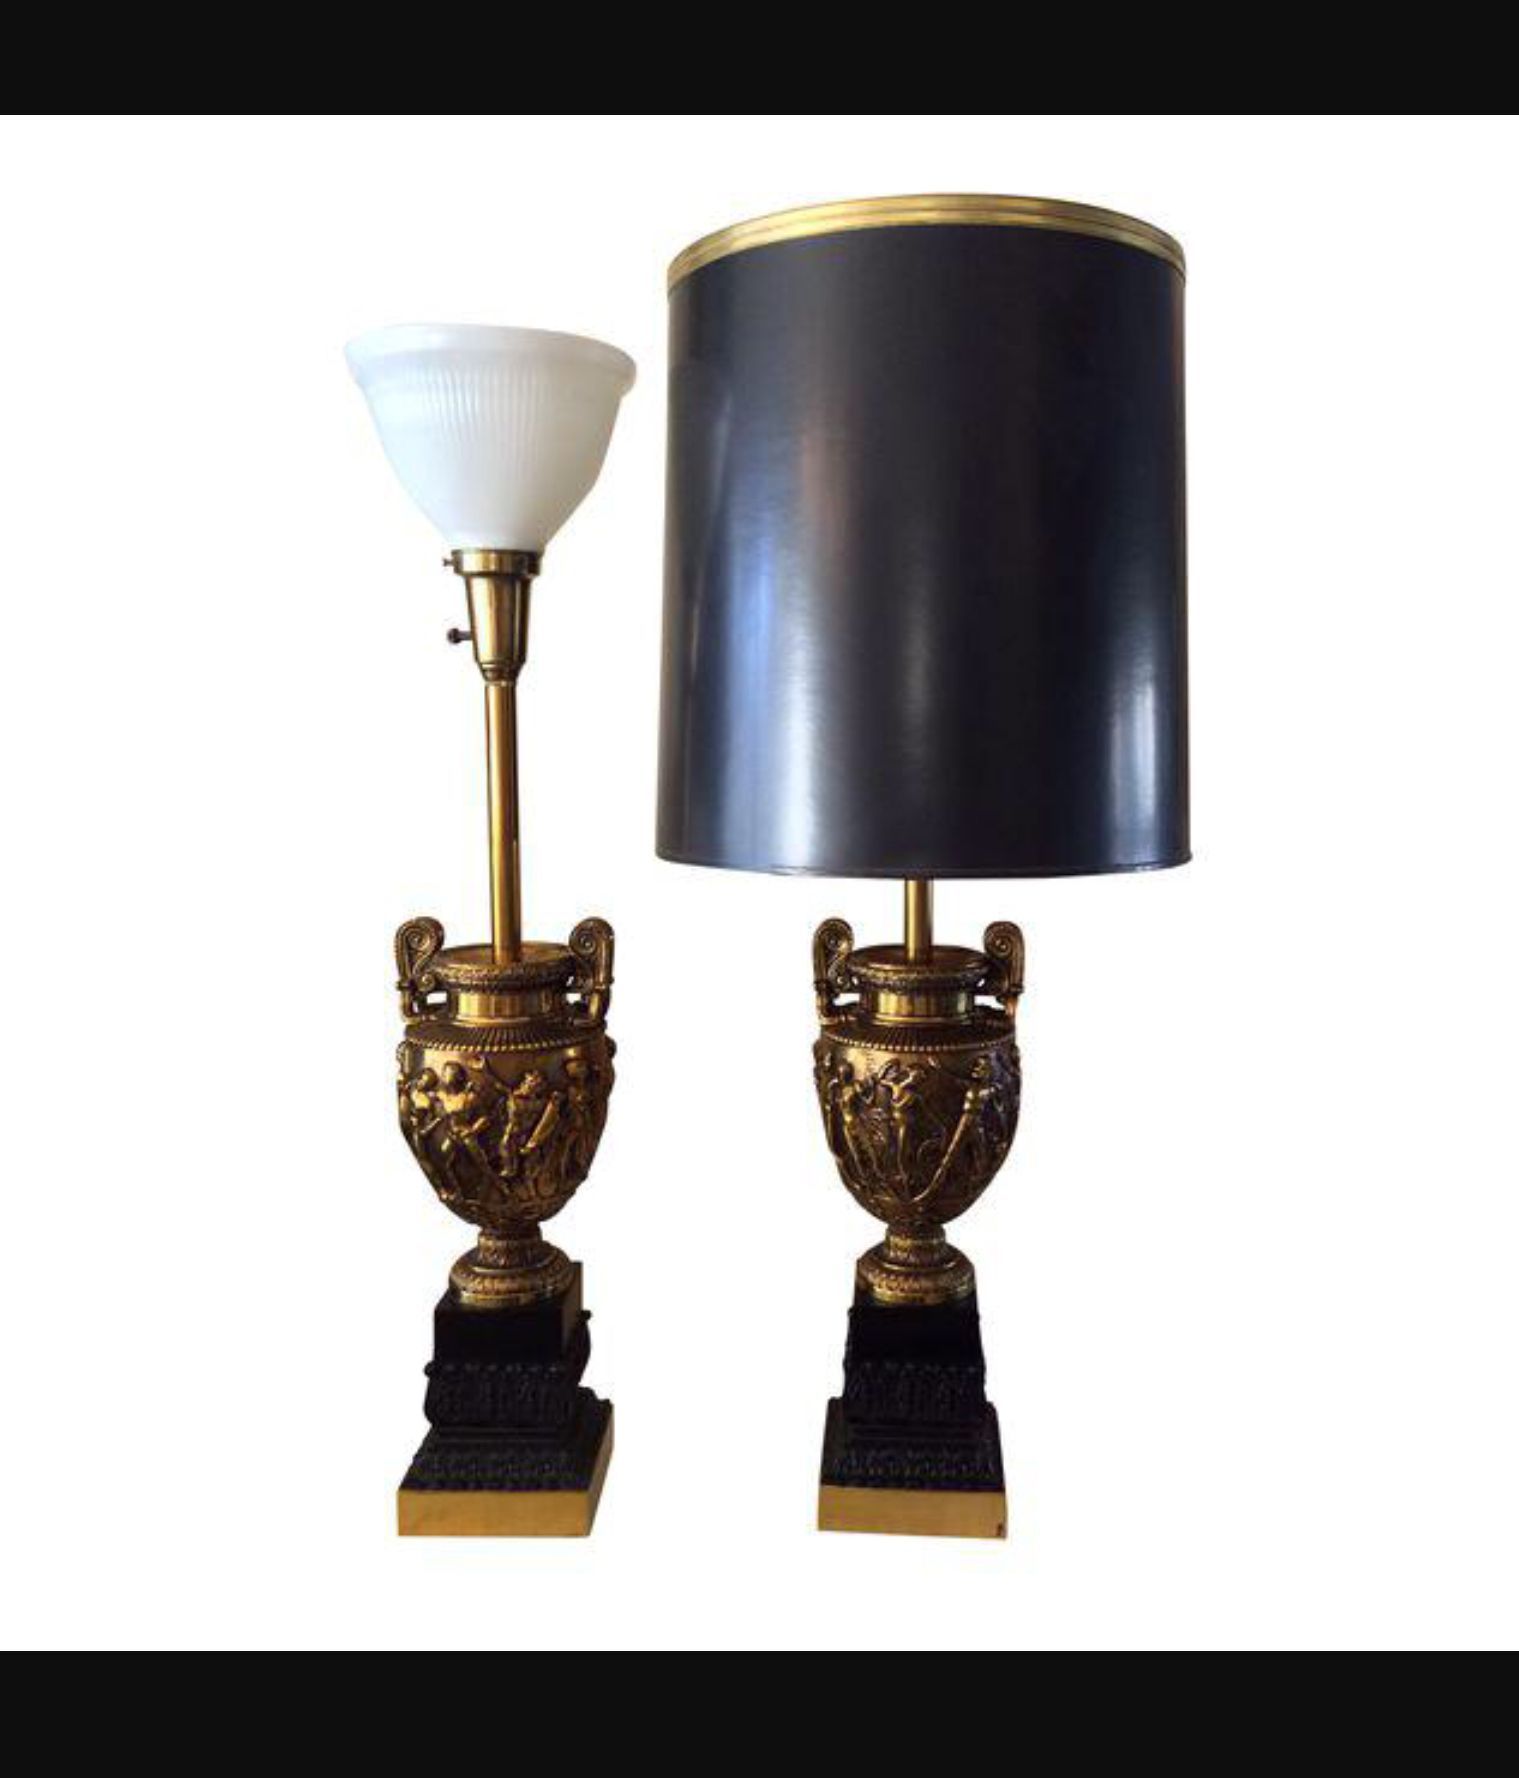 Vintage Stiffel Lamps Designed After The Townley Vase | Lamp, Lamp Throughout Recent Stiffel Wall Art (View 9 of 20)